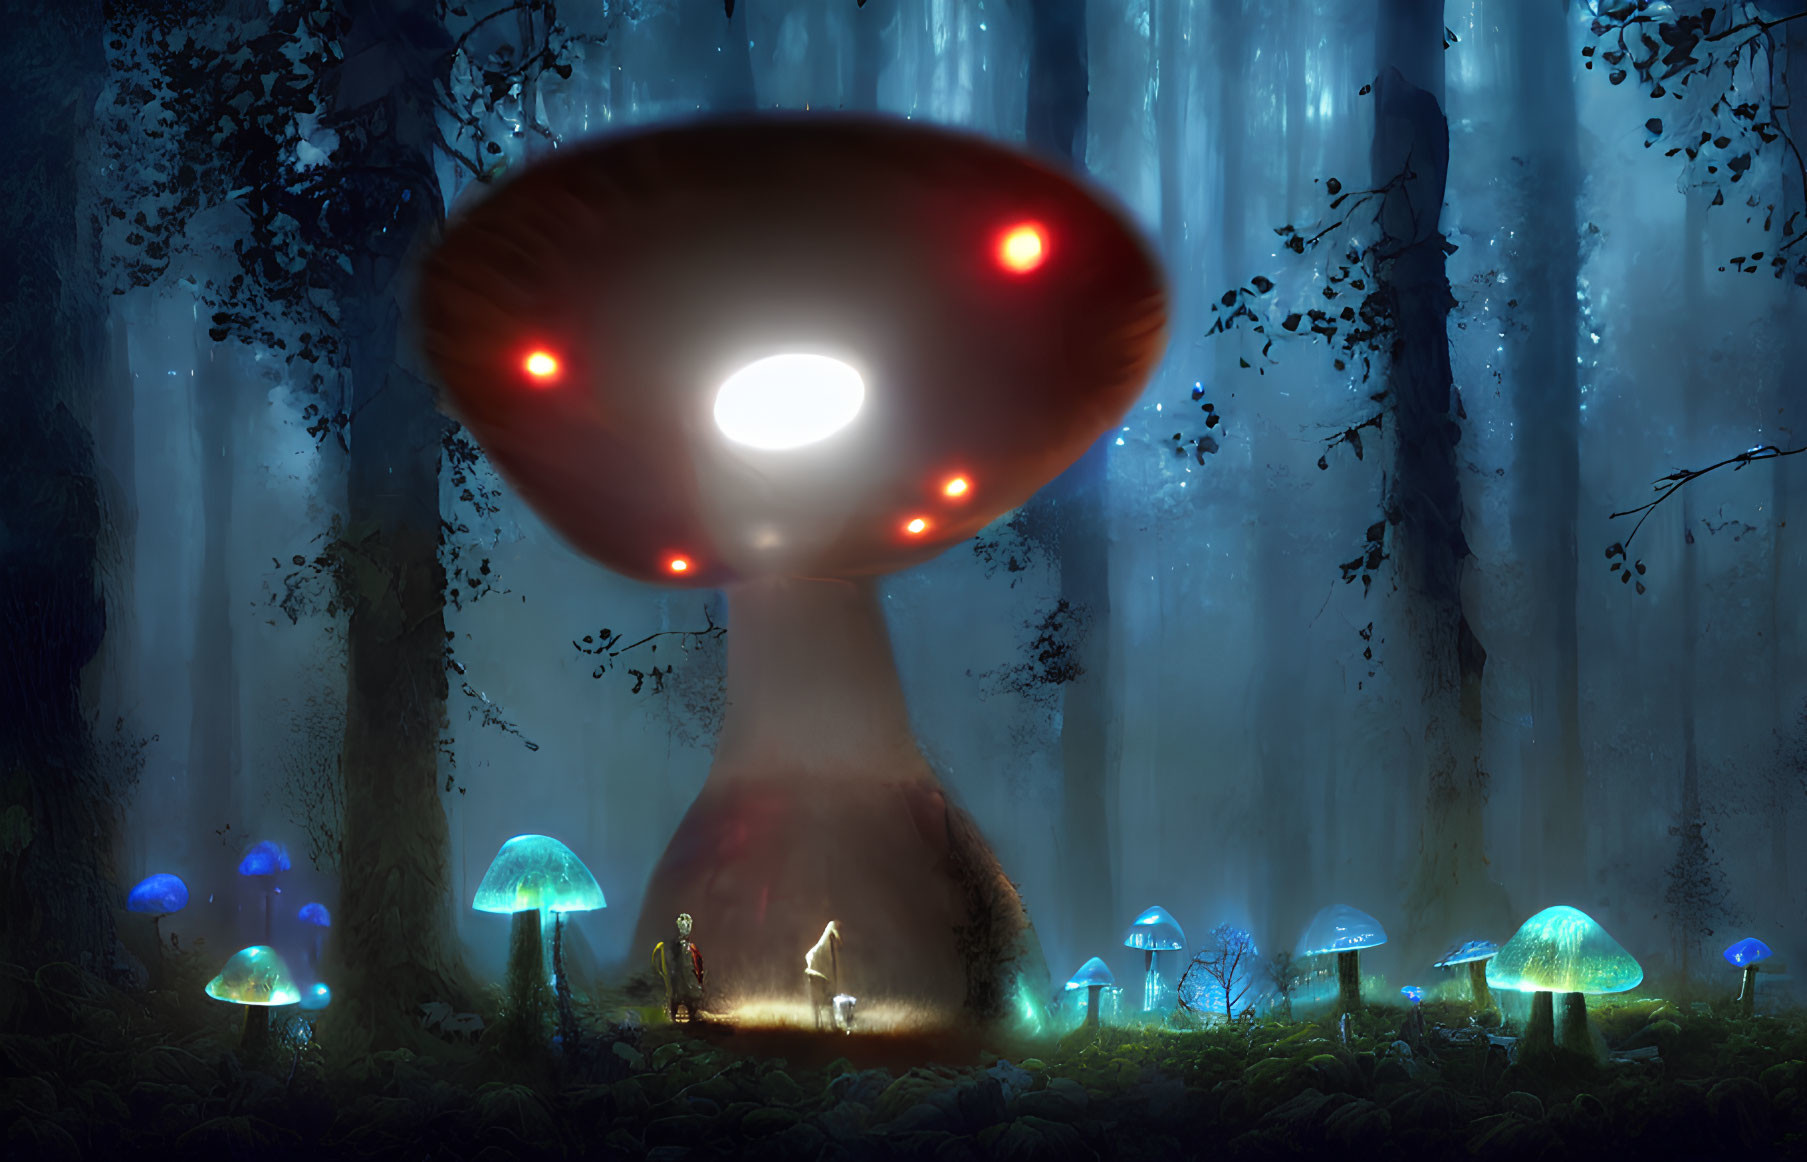 Person surrounded by glowing mushrooms gazes at red-lit UFO in misty forest